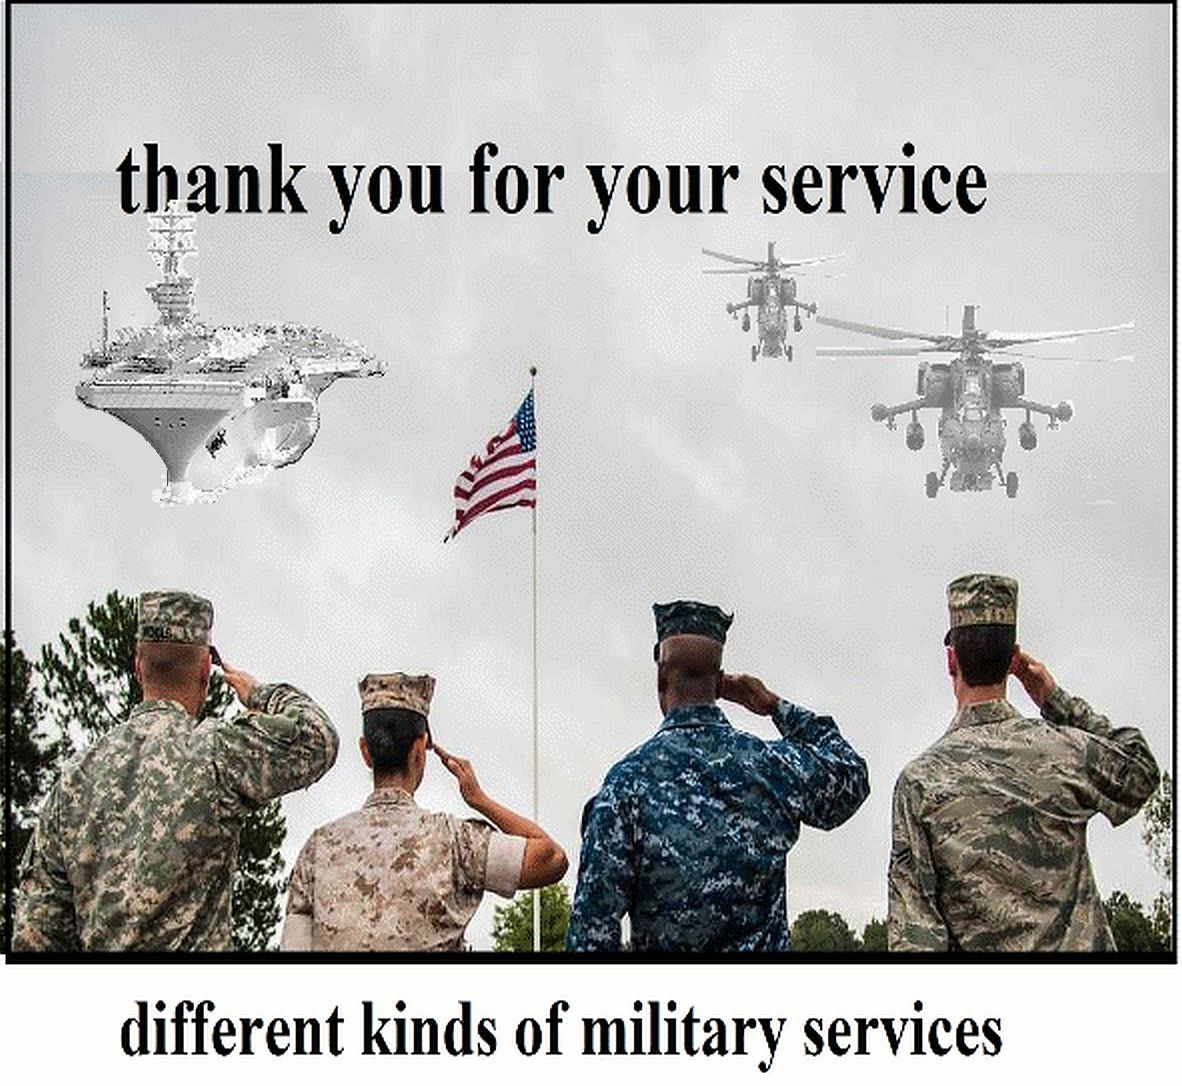 U.S. military service compared to Israel servant system